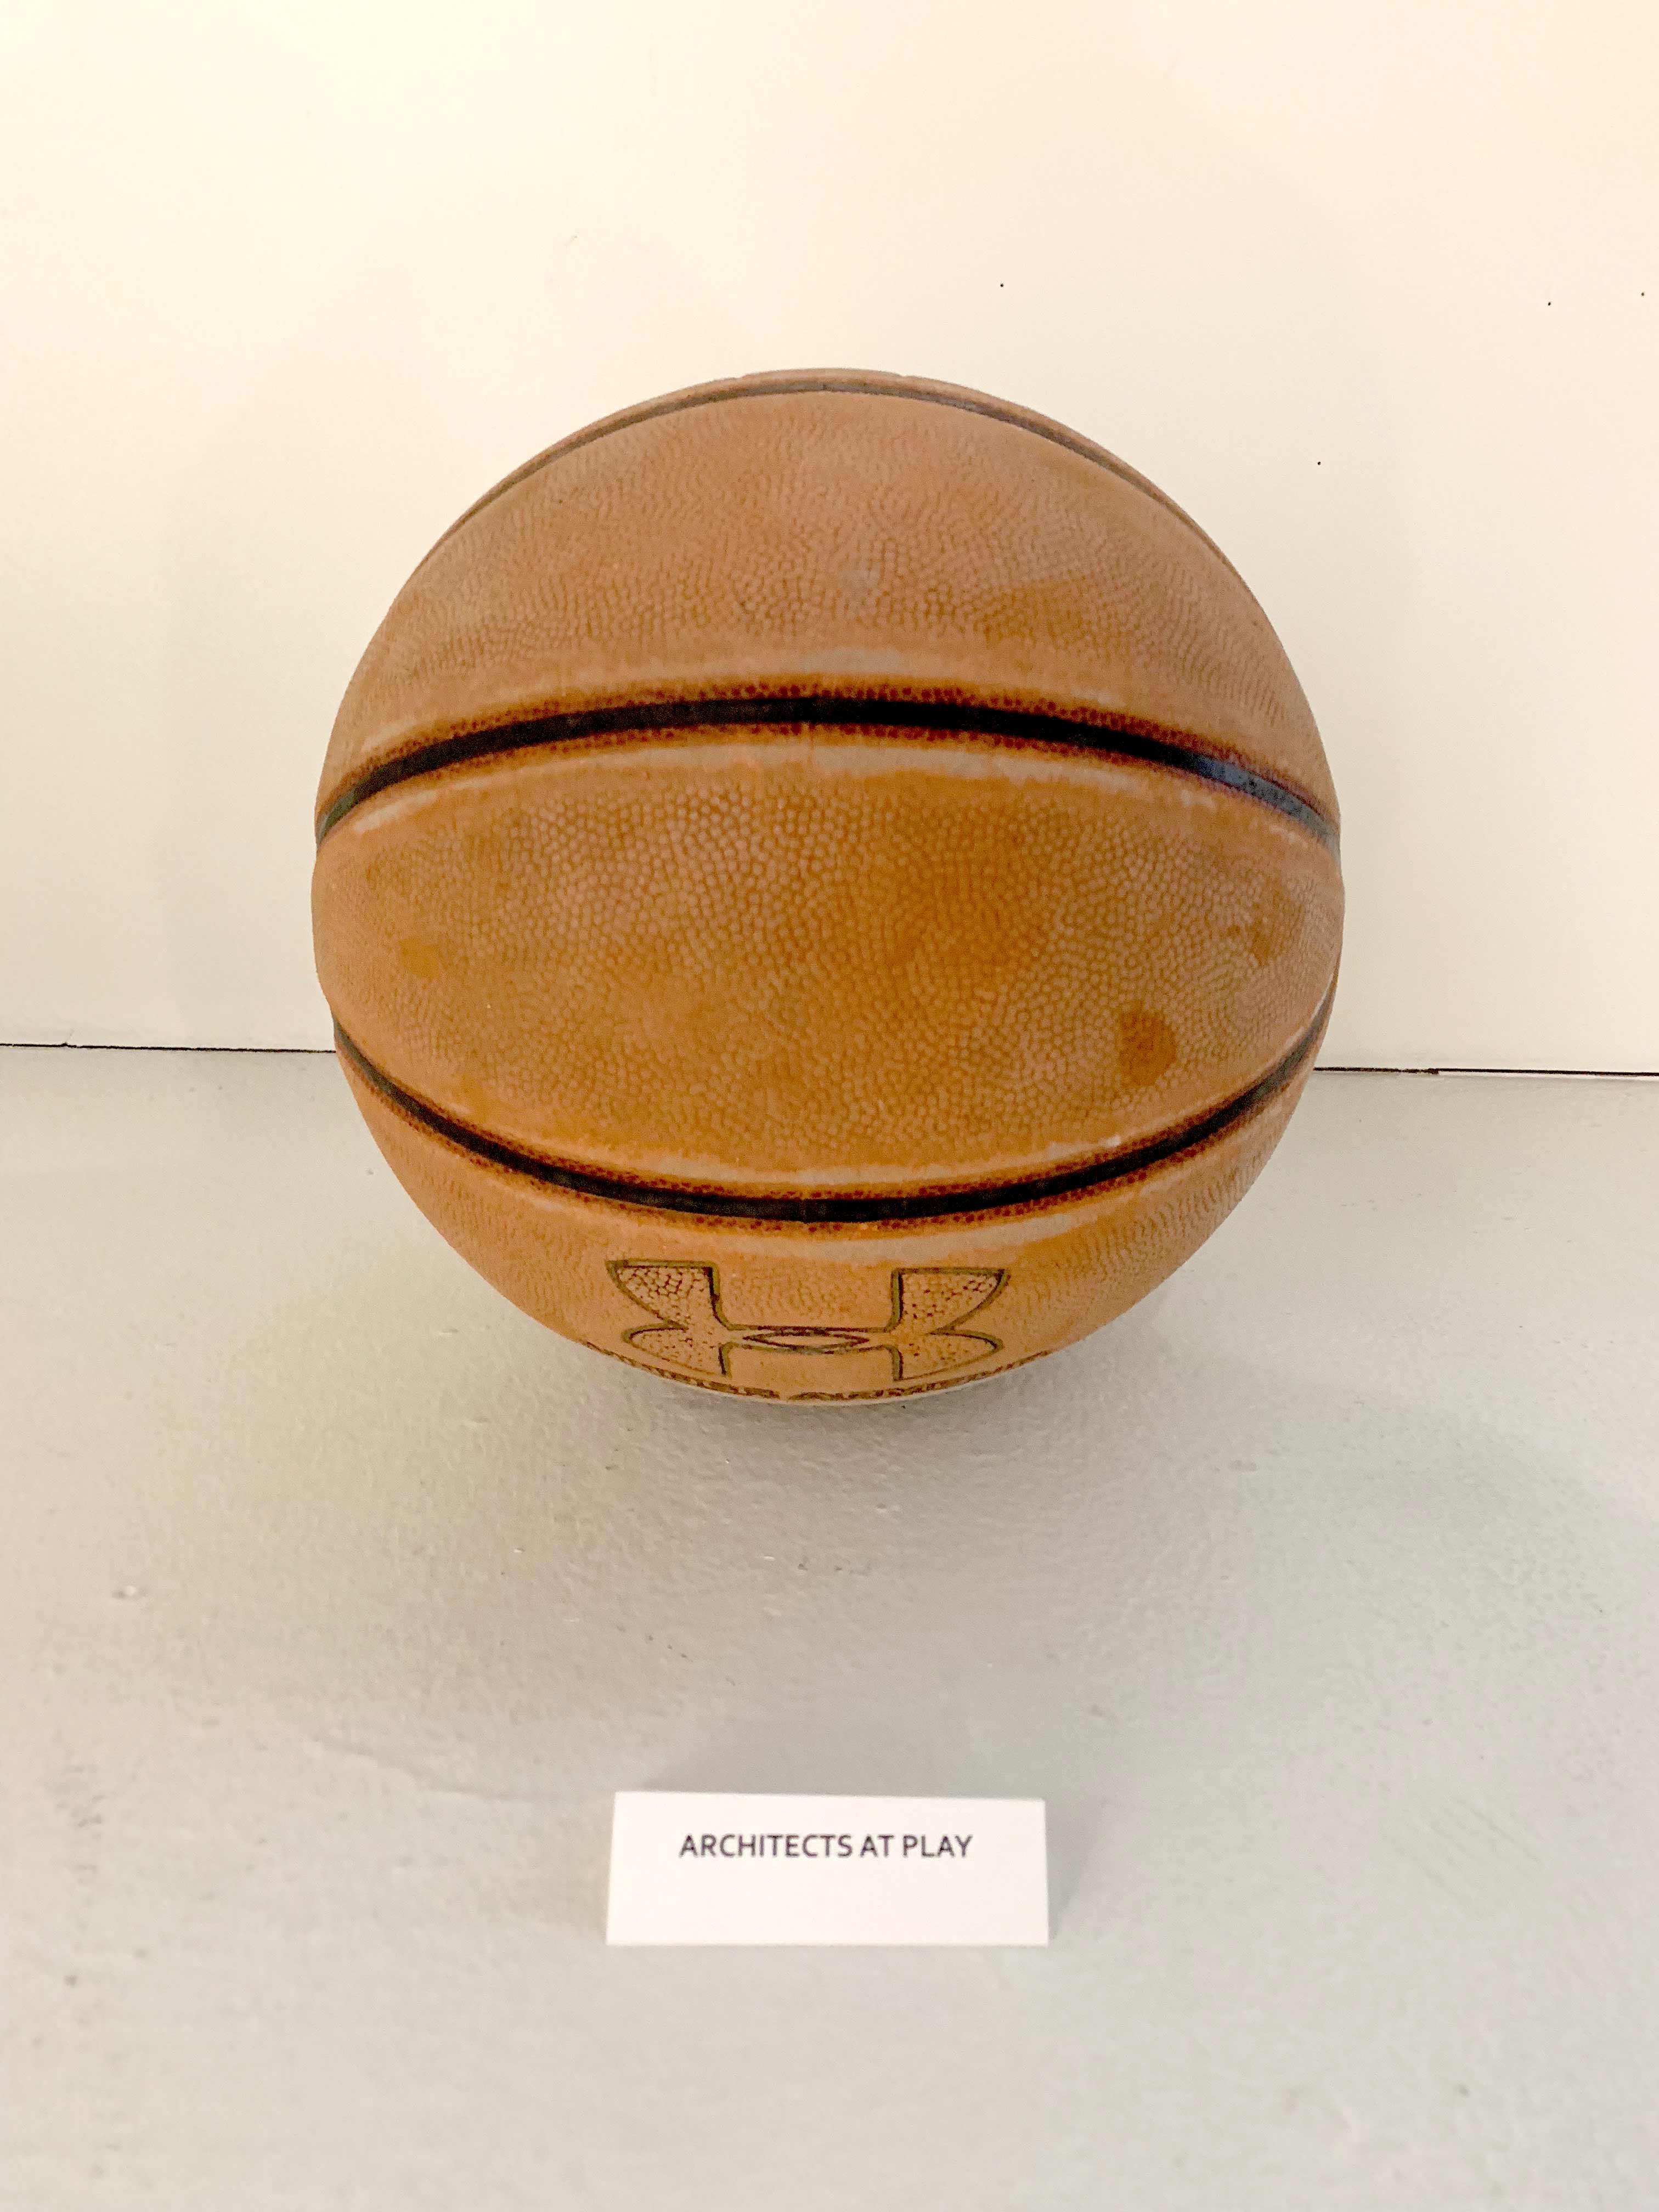 The favourite tool in our office: A basketball